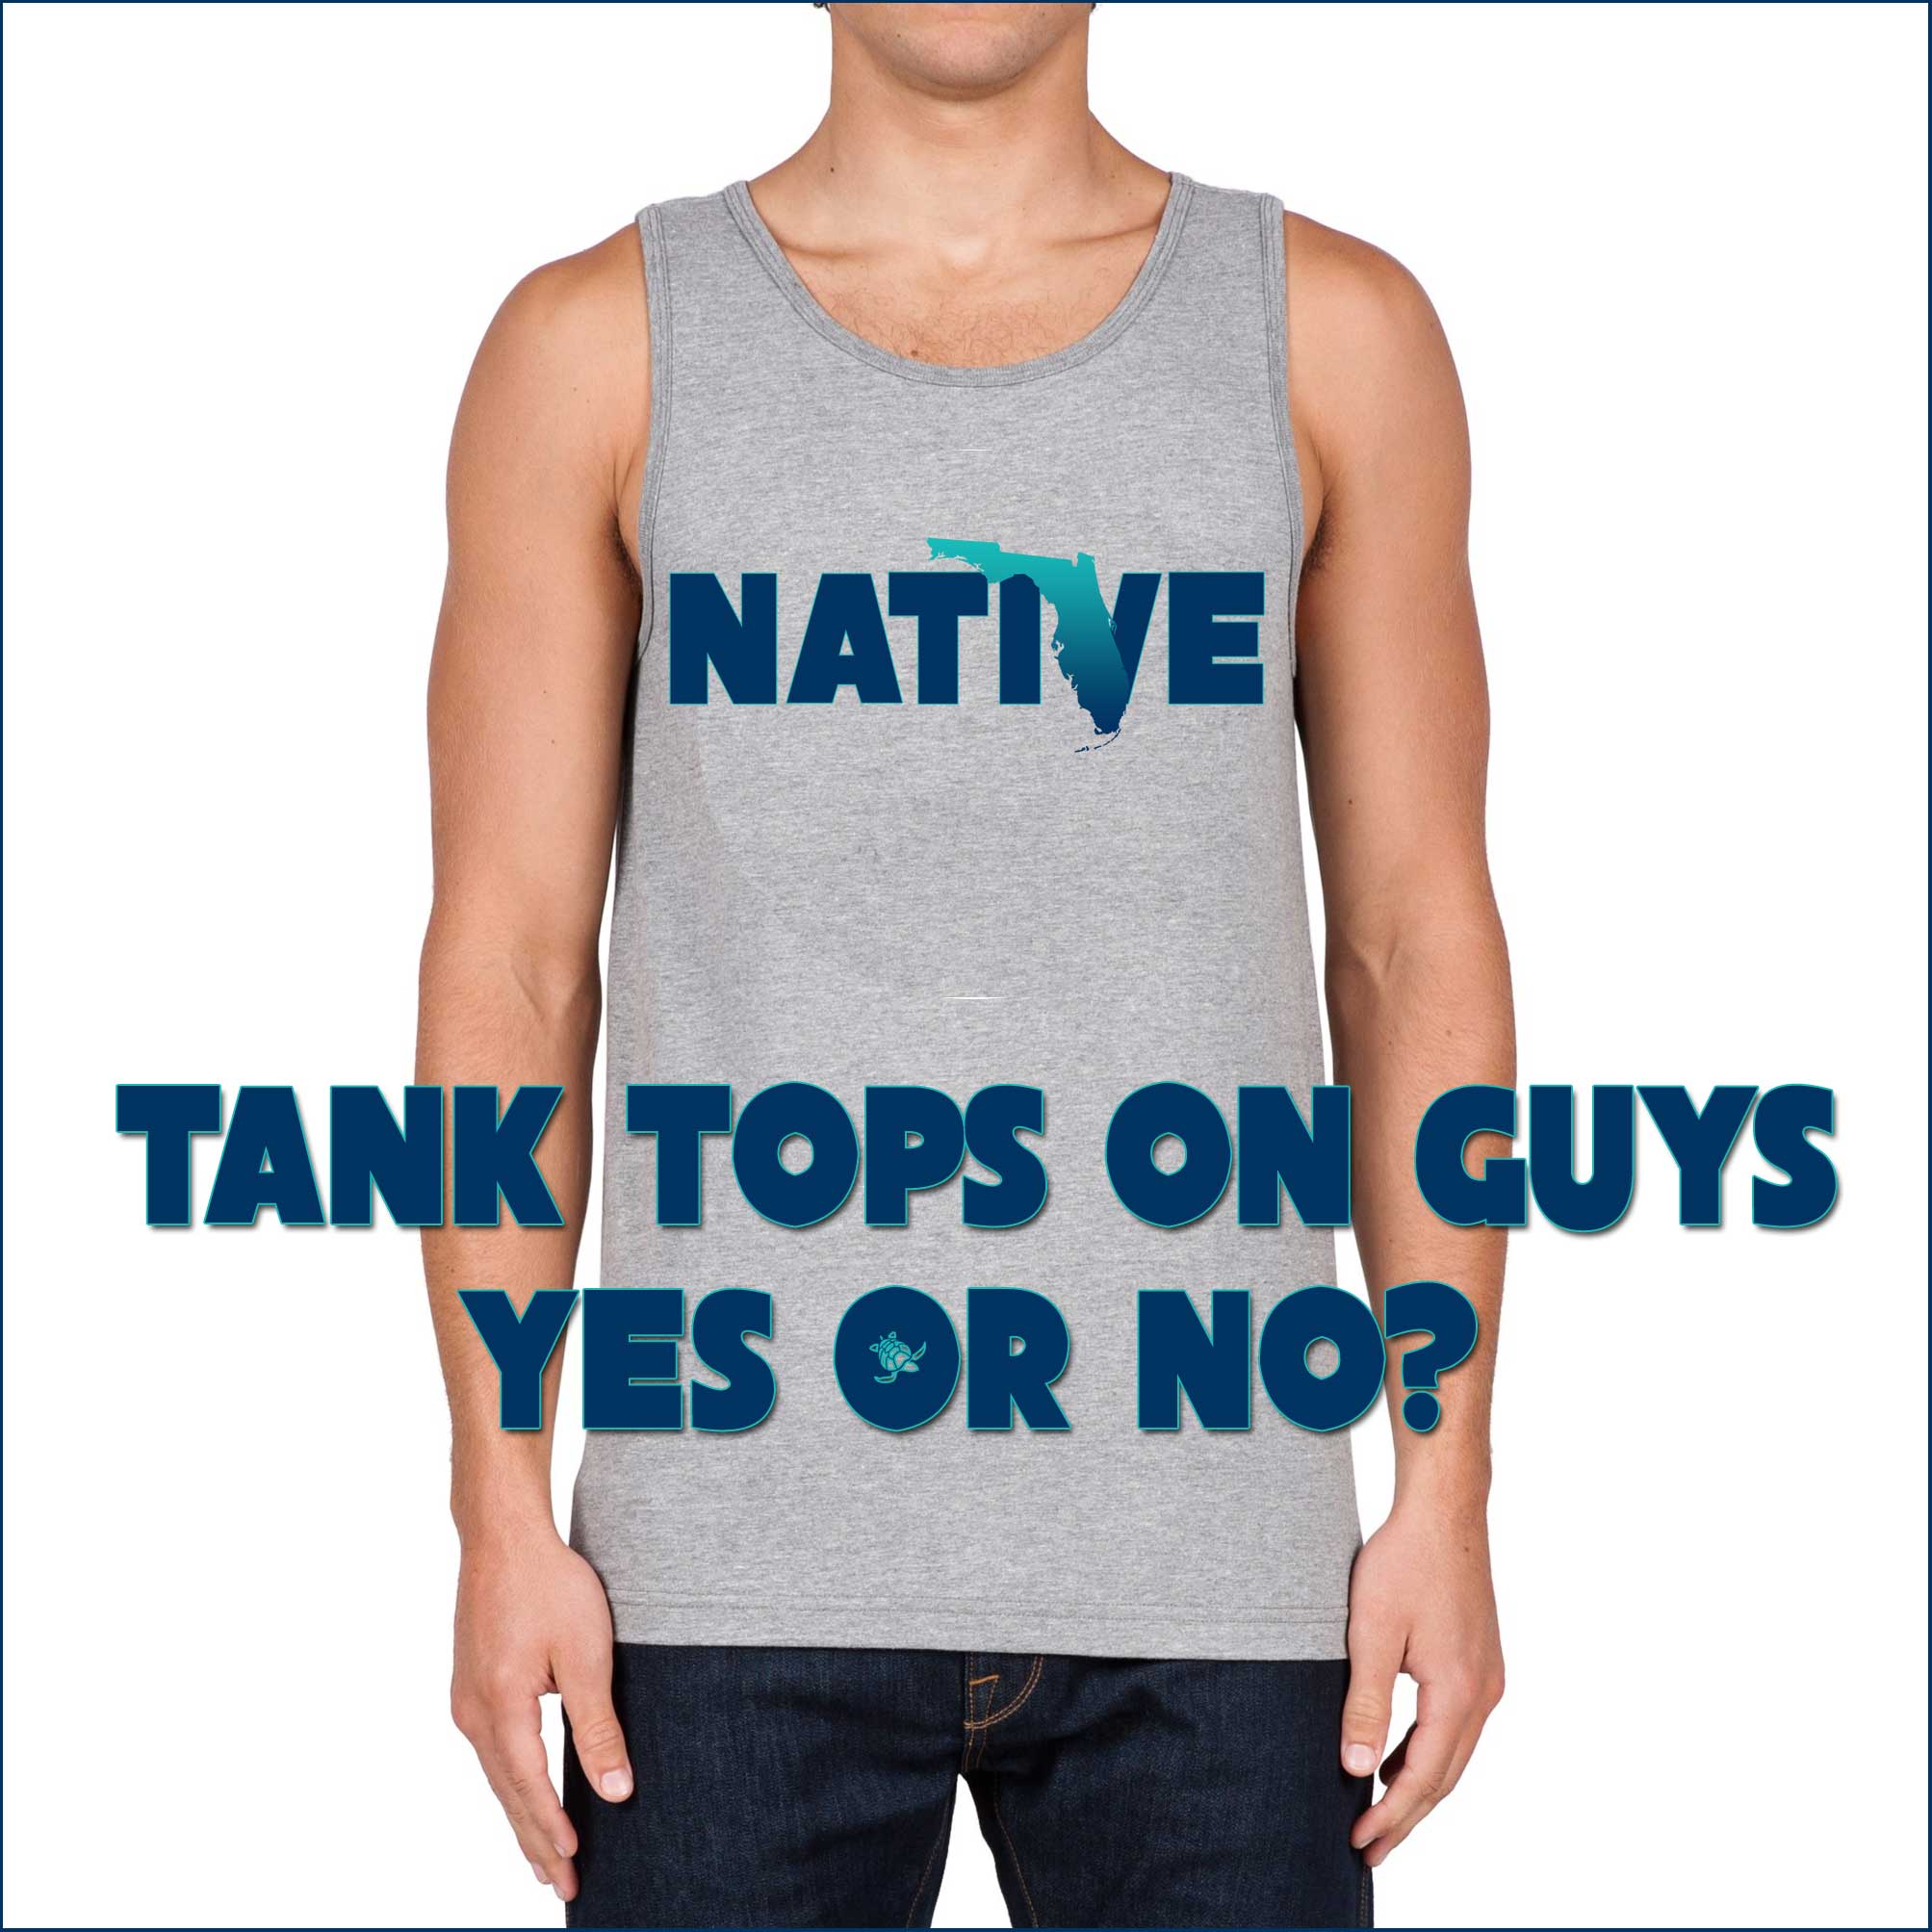 tank tops yes or no